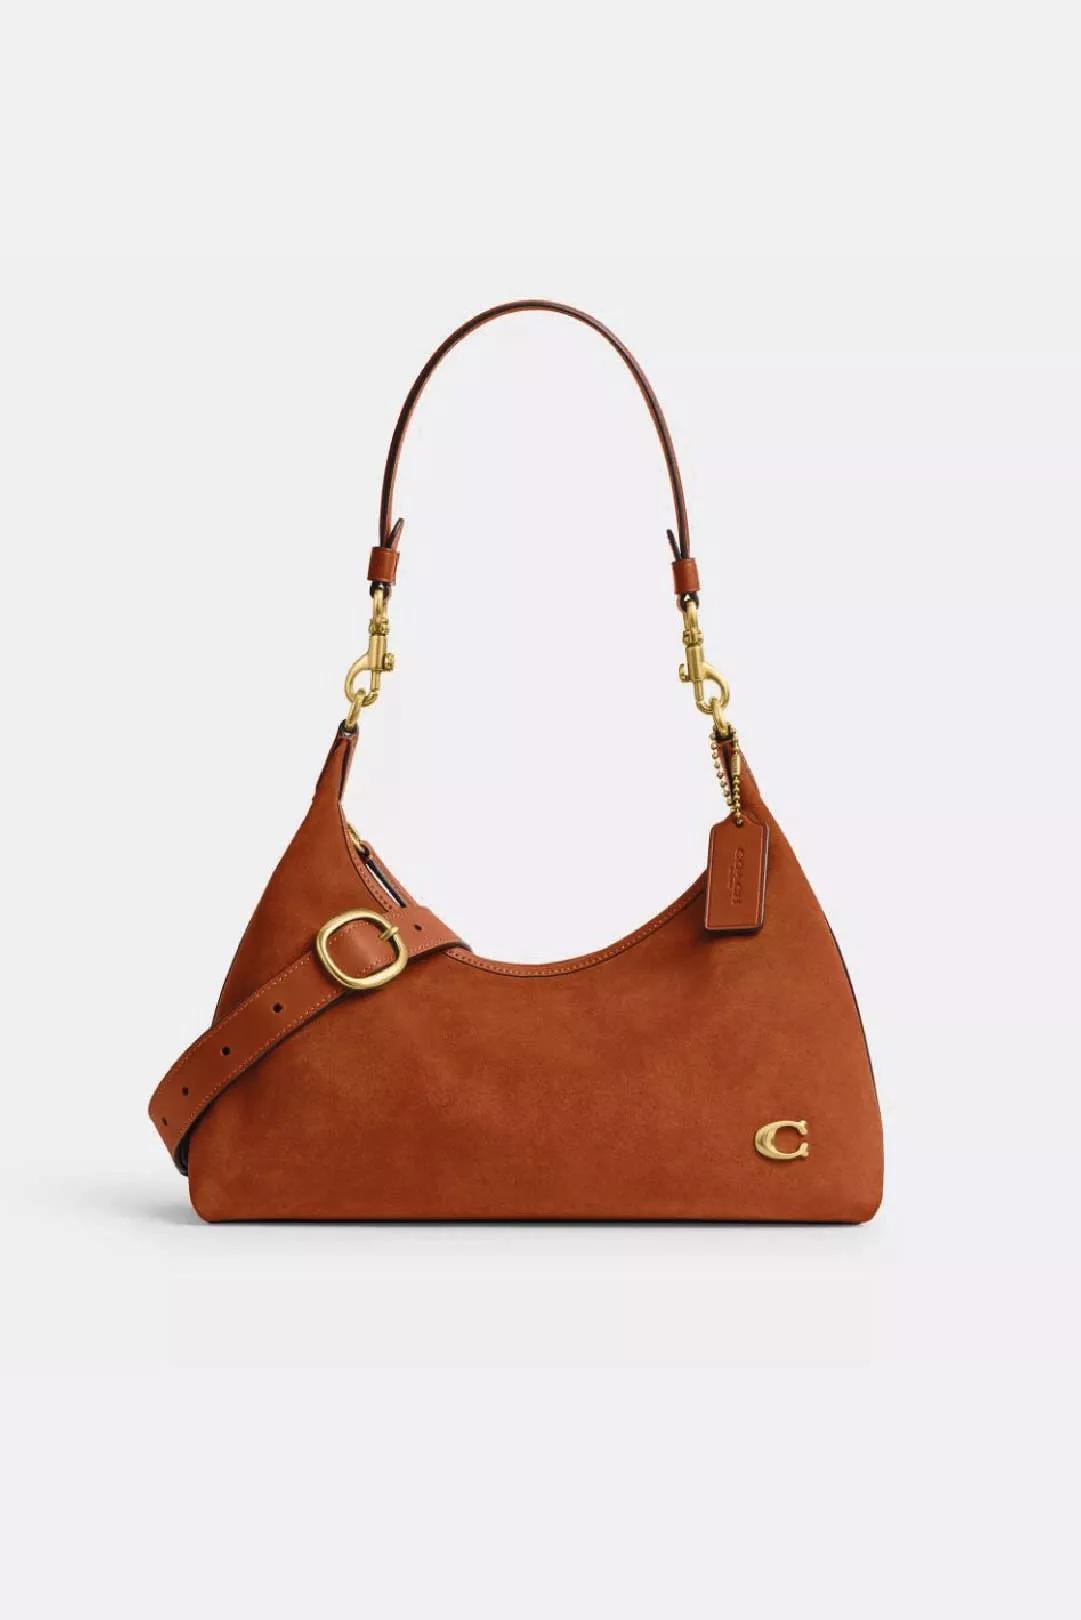 [CF Rideau Centre] - Mother's Day Gift Guide - Coach